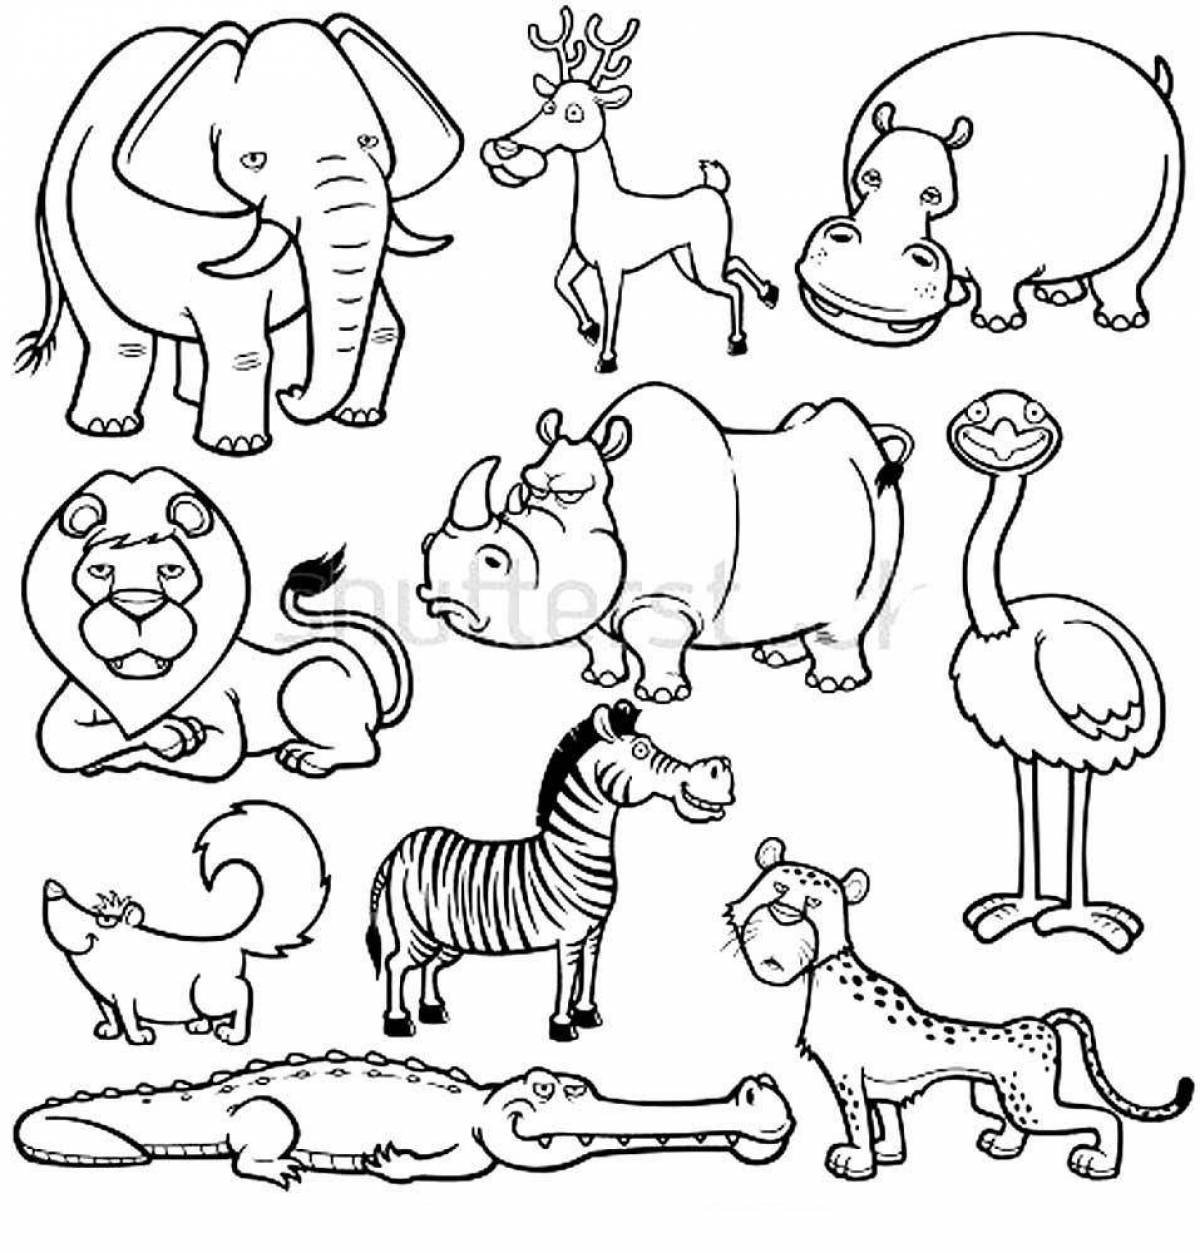 Adorable African animal coloring book for 4-5 year olds